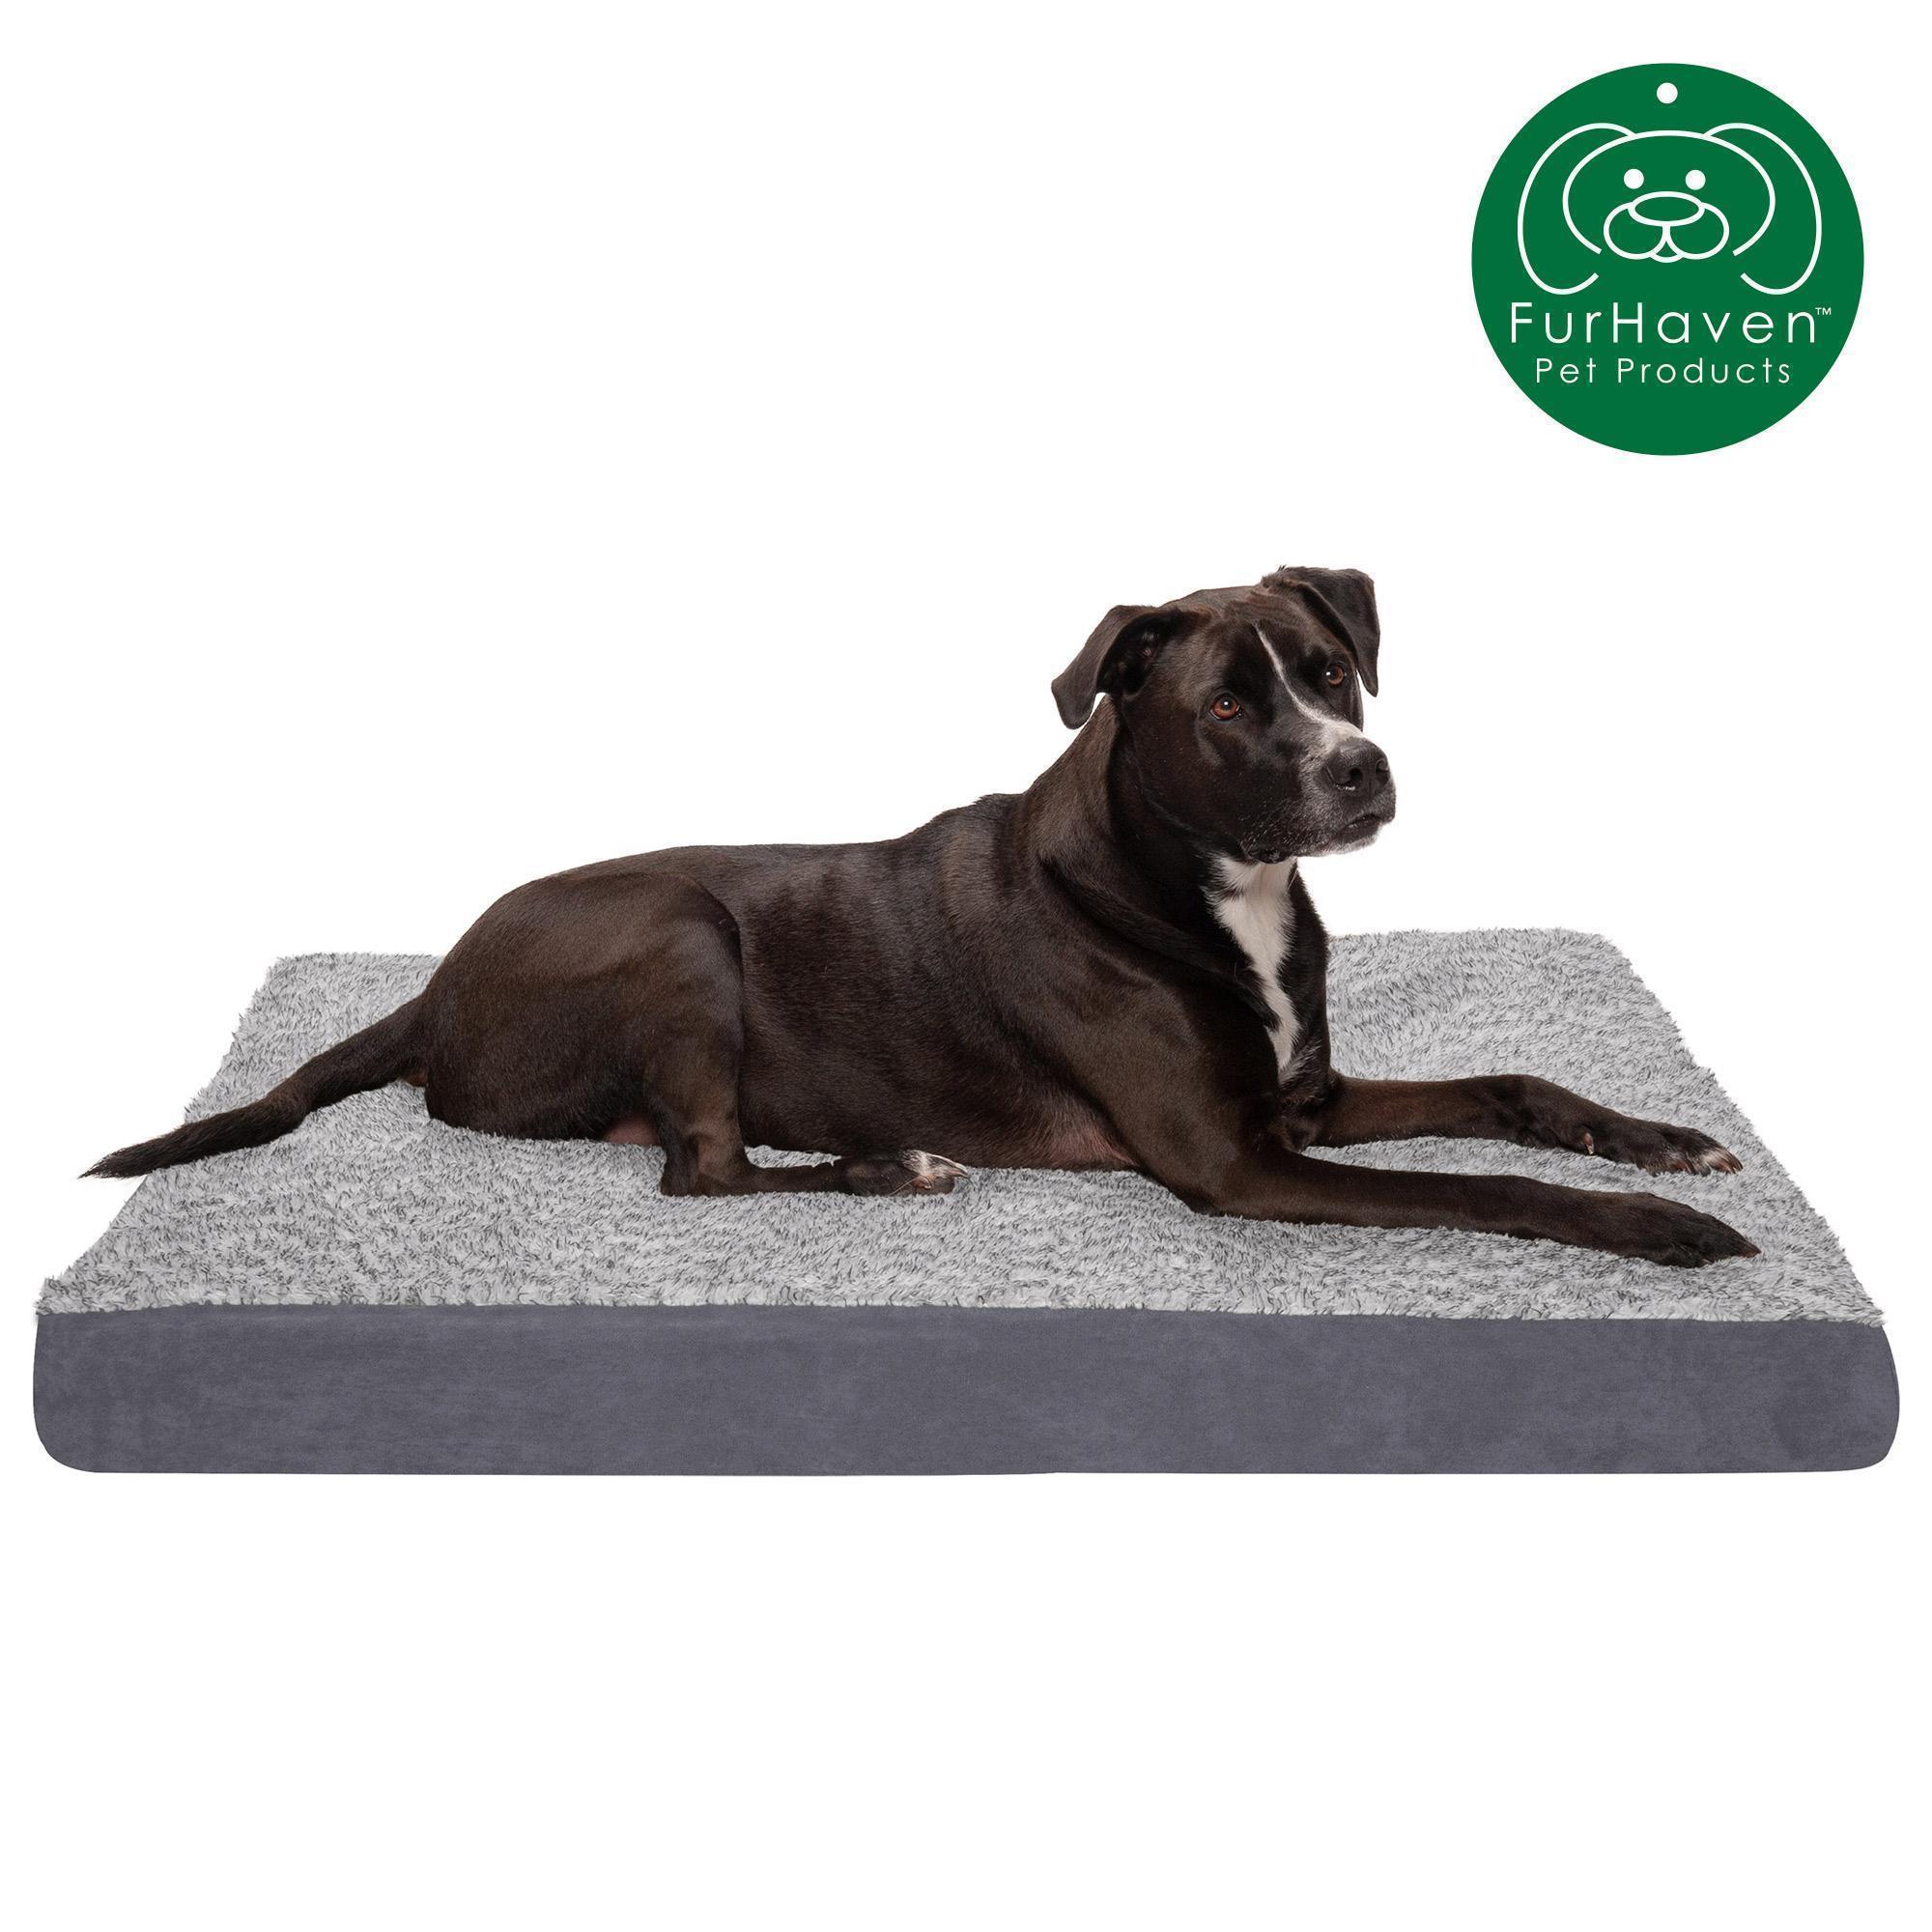 shop for FurHaven Pet Dog Bed | Deluxe Two-Tone Faux Fur & Suede Memory Foam Pet Bed for Dogs & Cats, Stone Gray, Jumbo